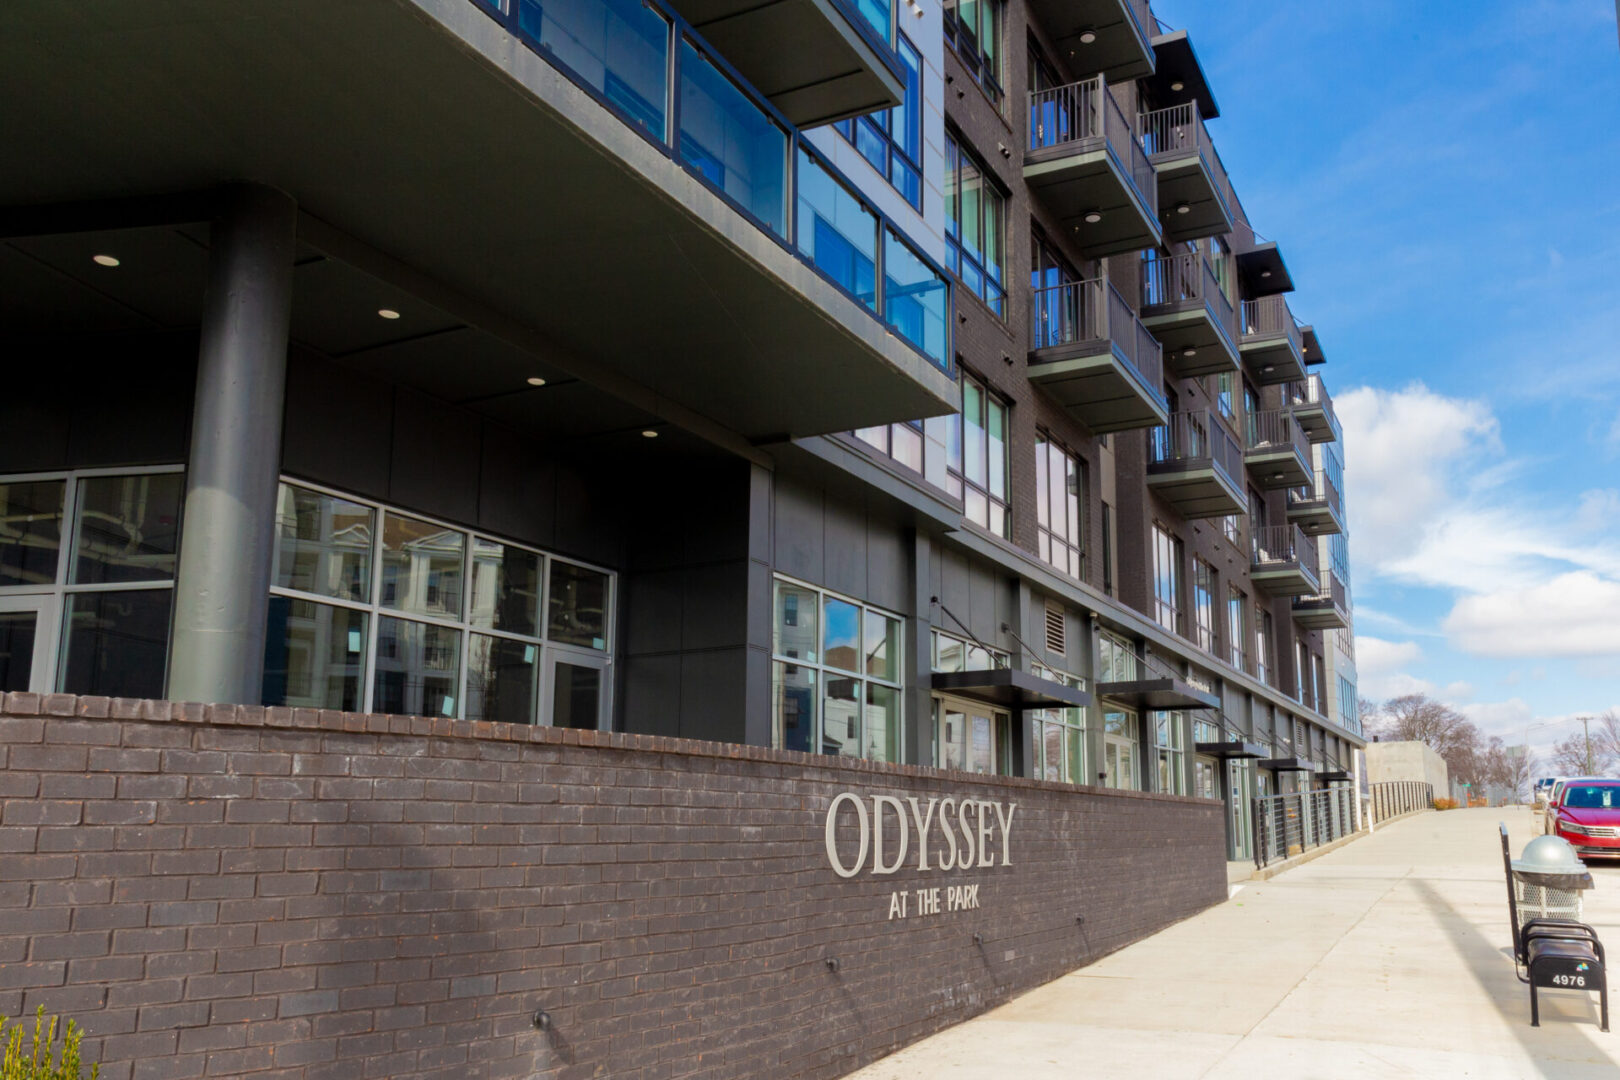 A building with the word odyssey on it.